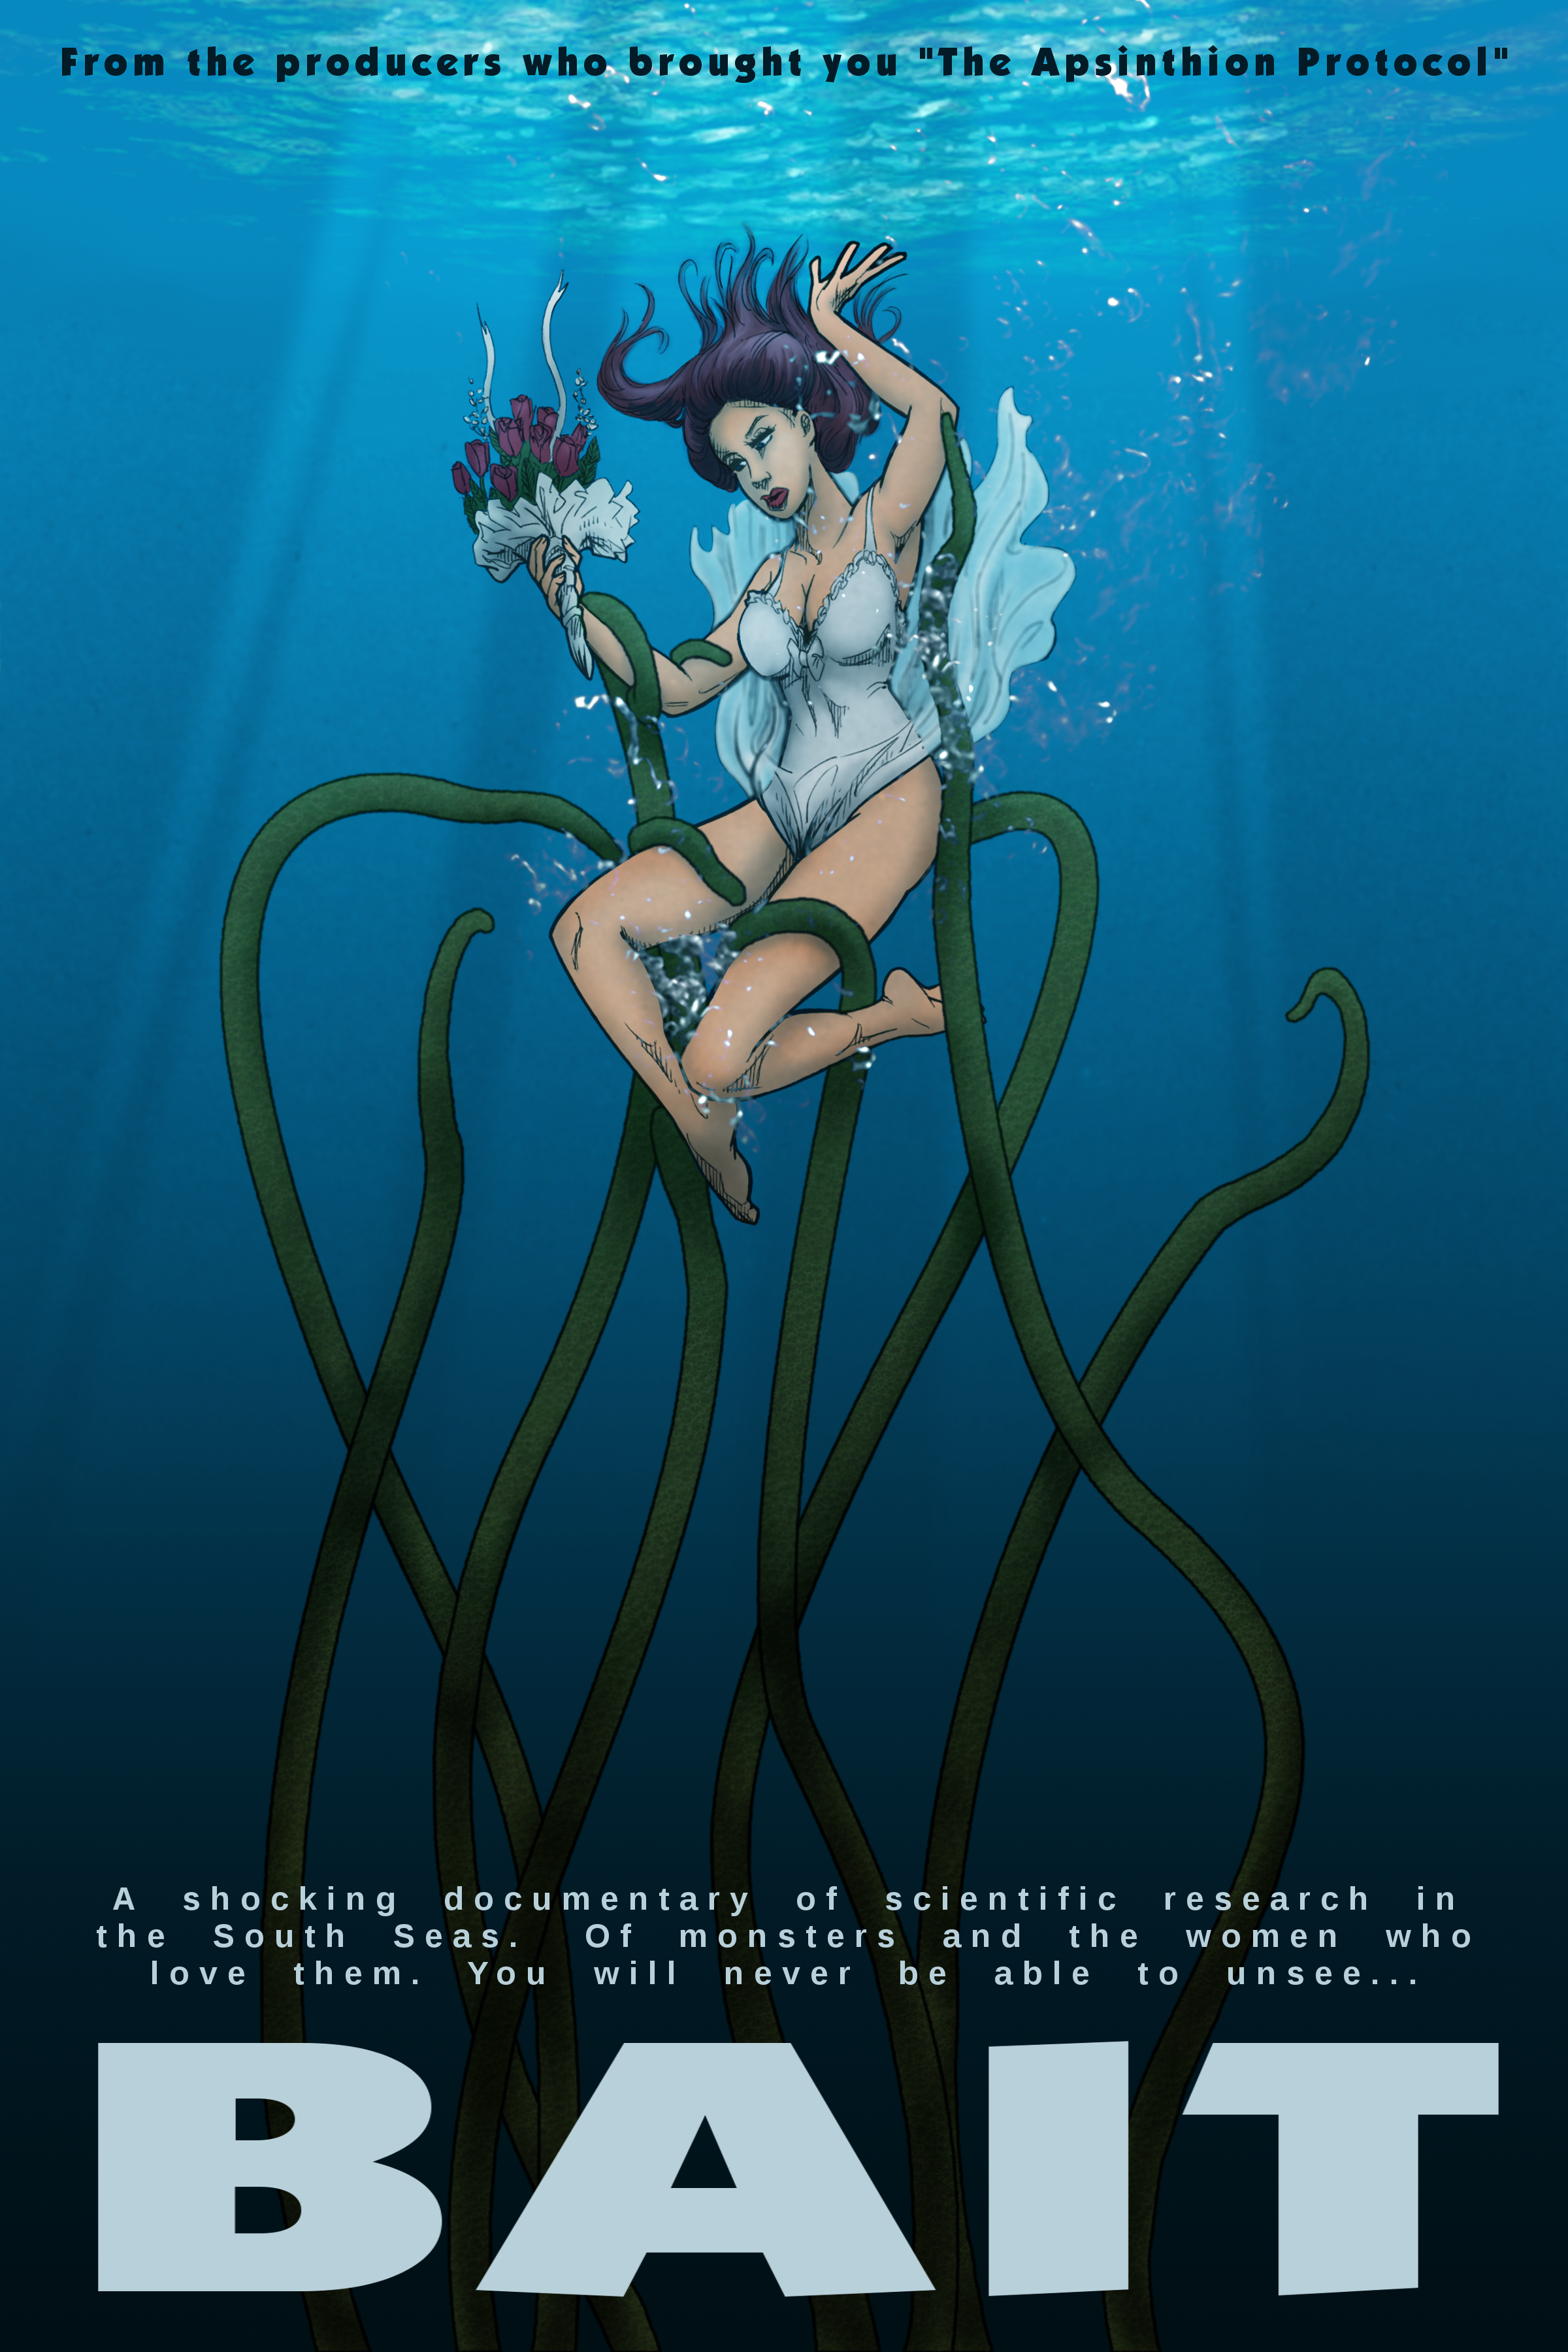 Imagined poster promoting the tentacle sex pseudo-documentary "Bait."